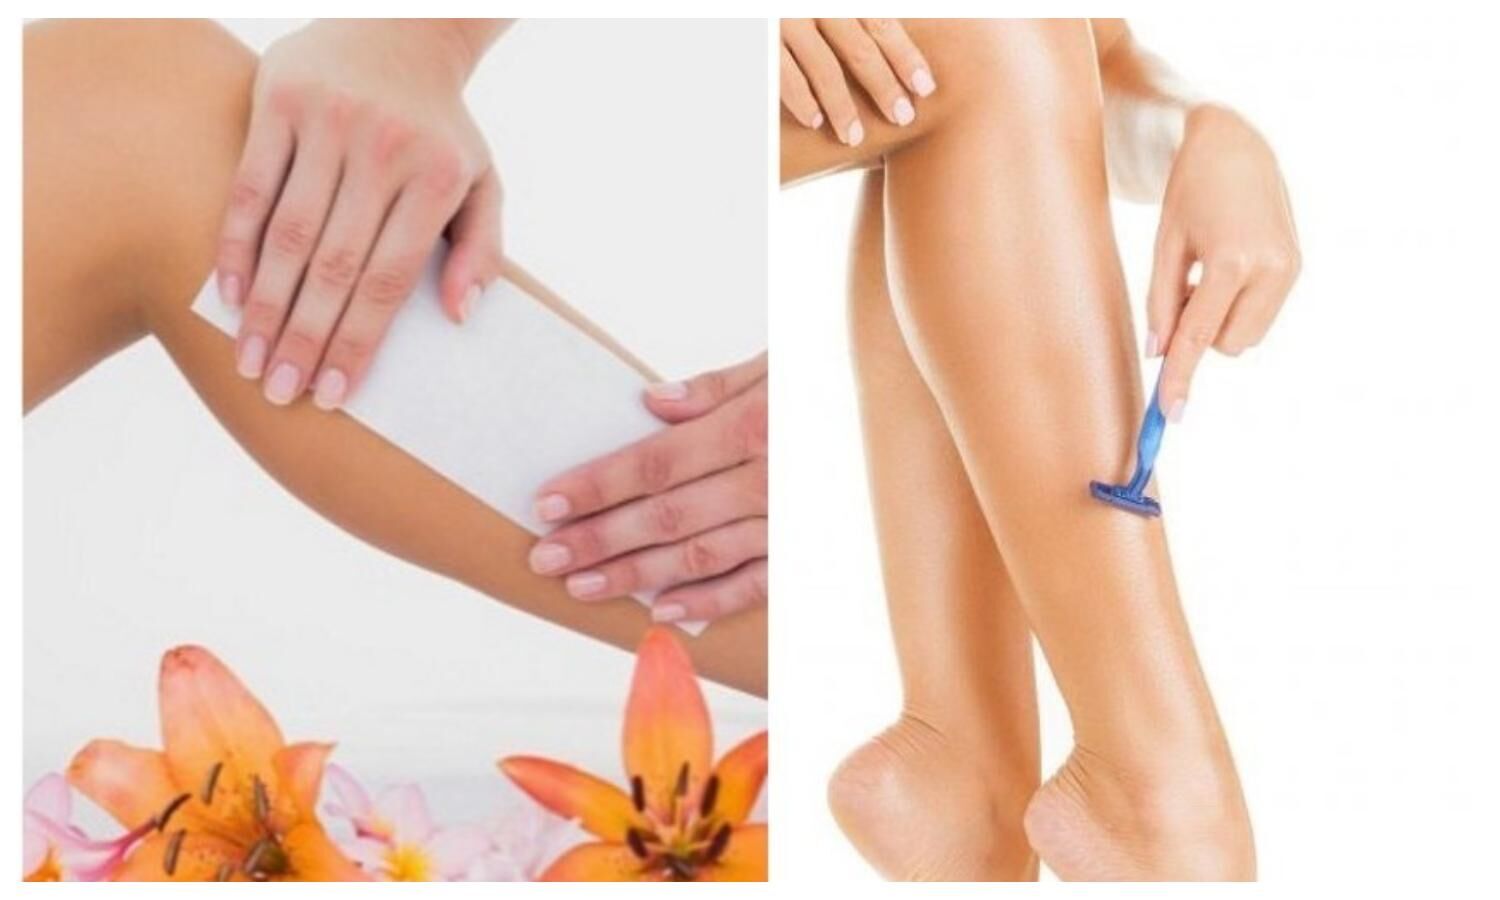 Waxing vs Shaving: These four reasons related to waxing make it better than shaving